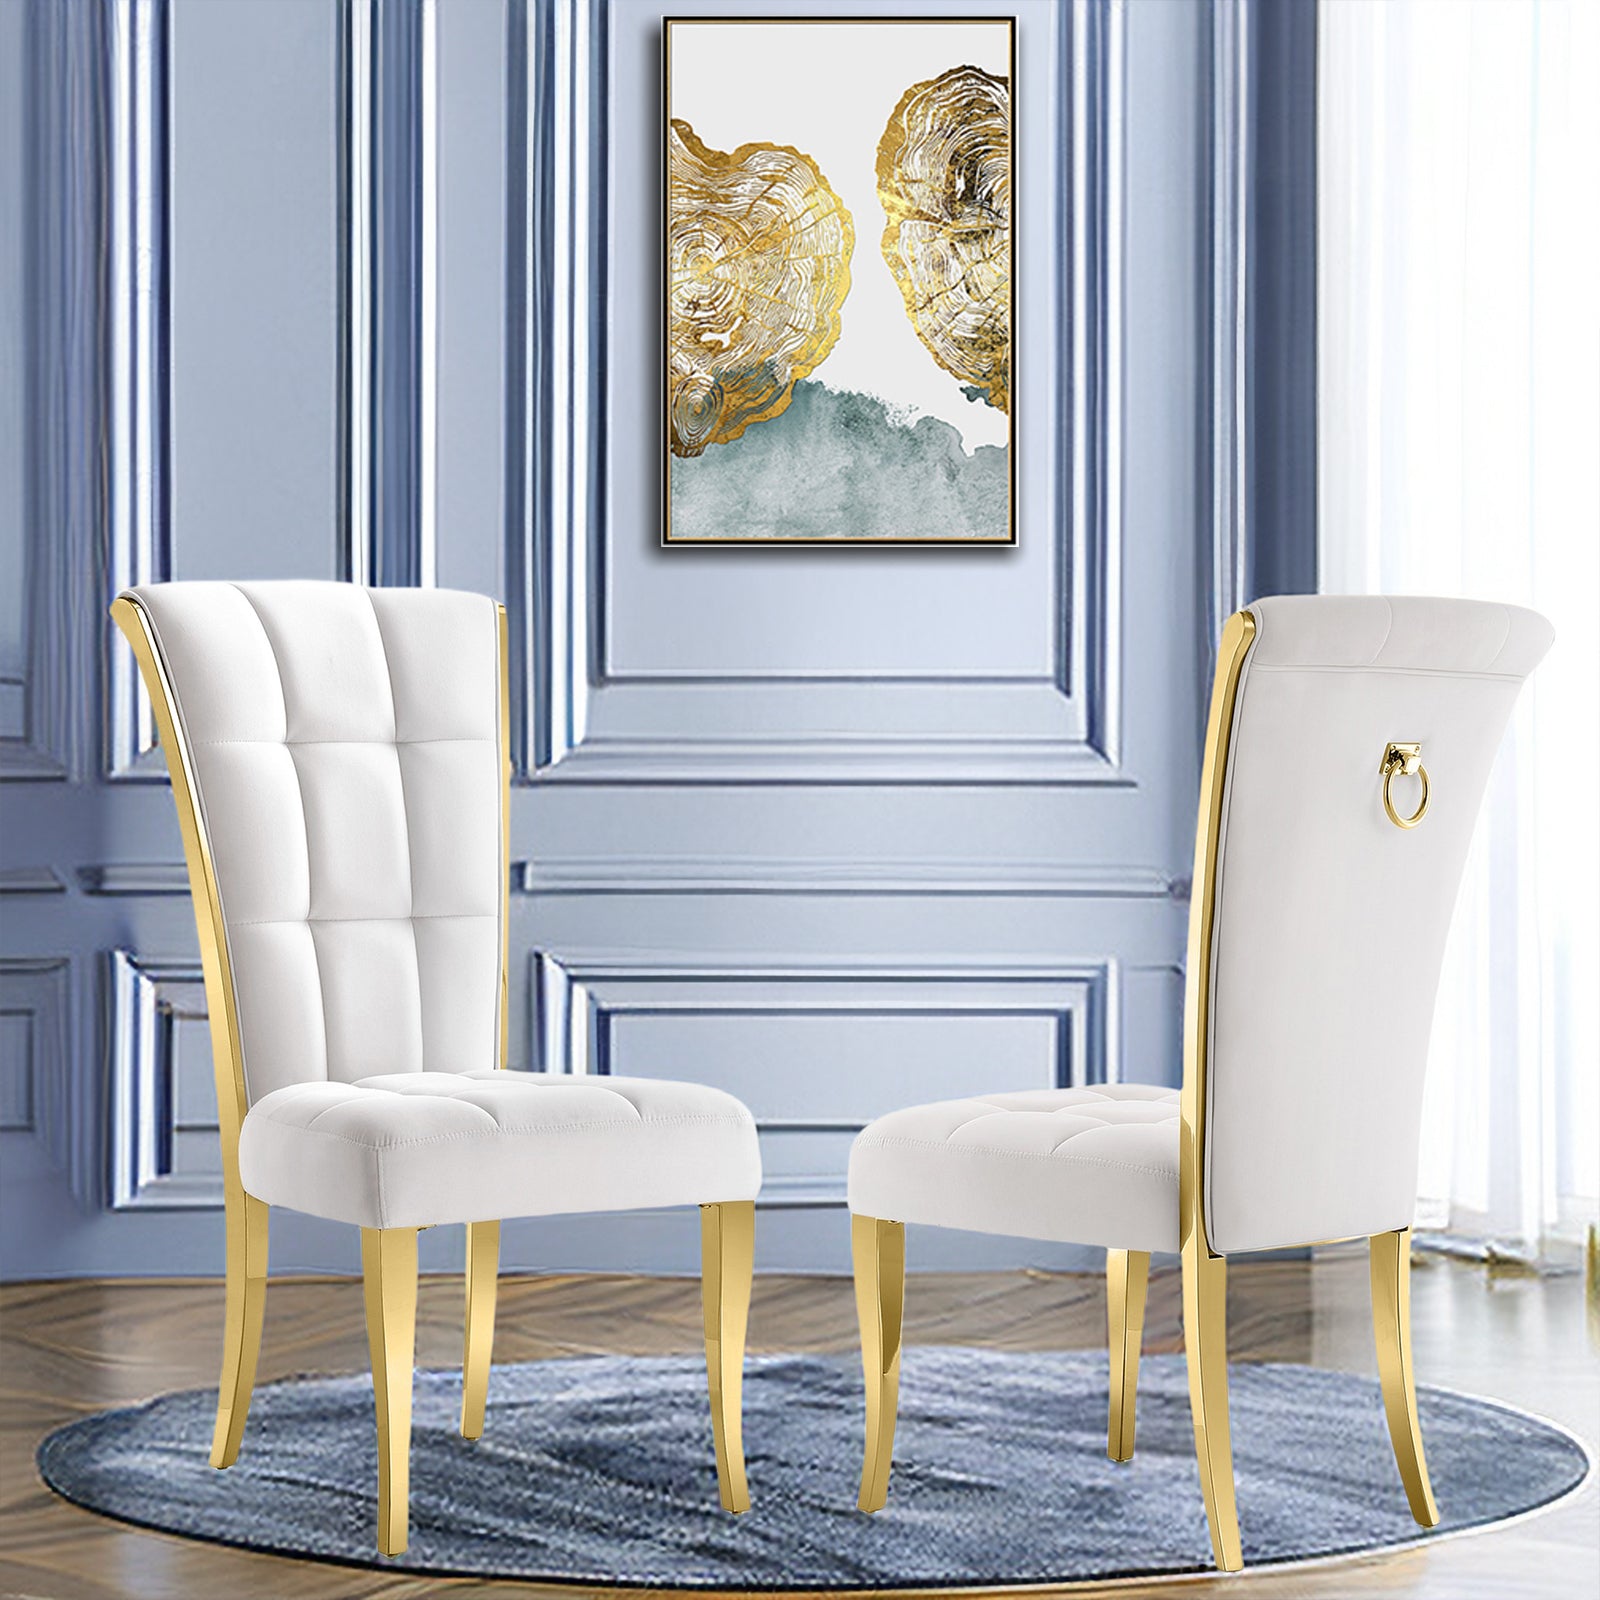 Discover Elegance with AUZ Furniture's White and Gold Dining Chairs